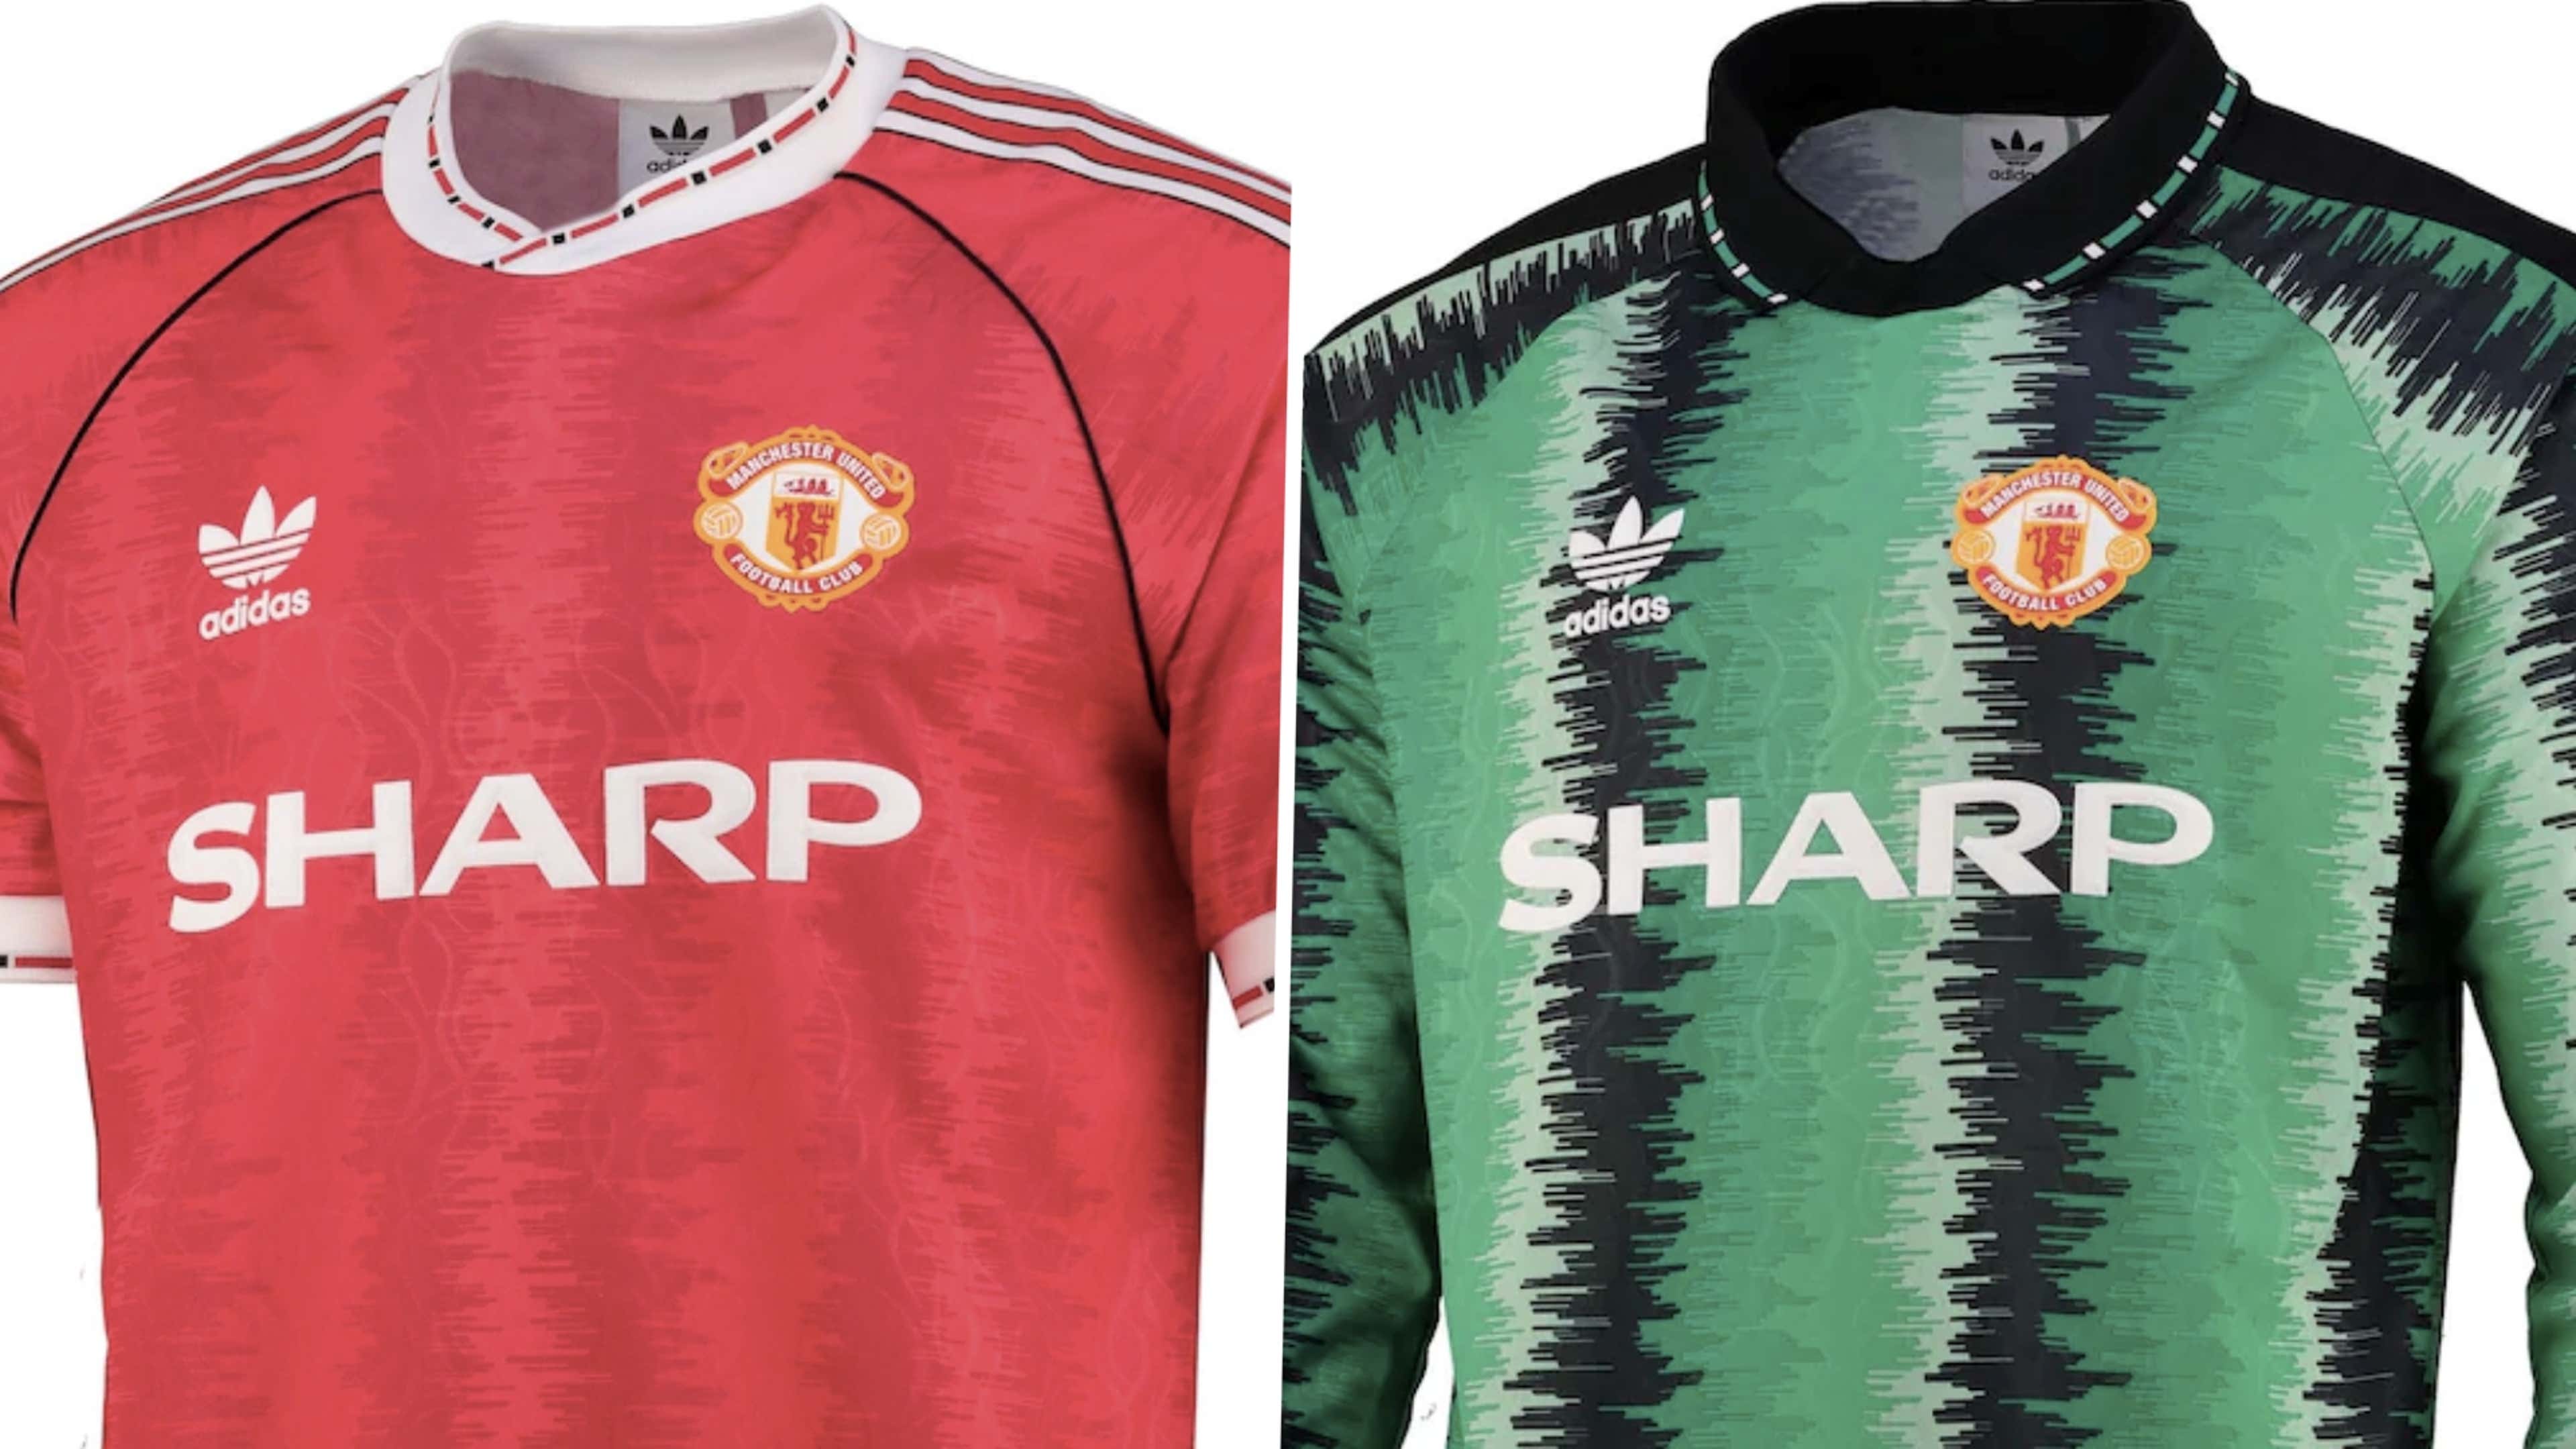 Man Utd and Adidas release 90's retro inspired clothing collection Singapore